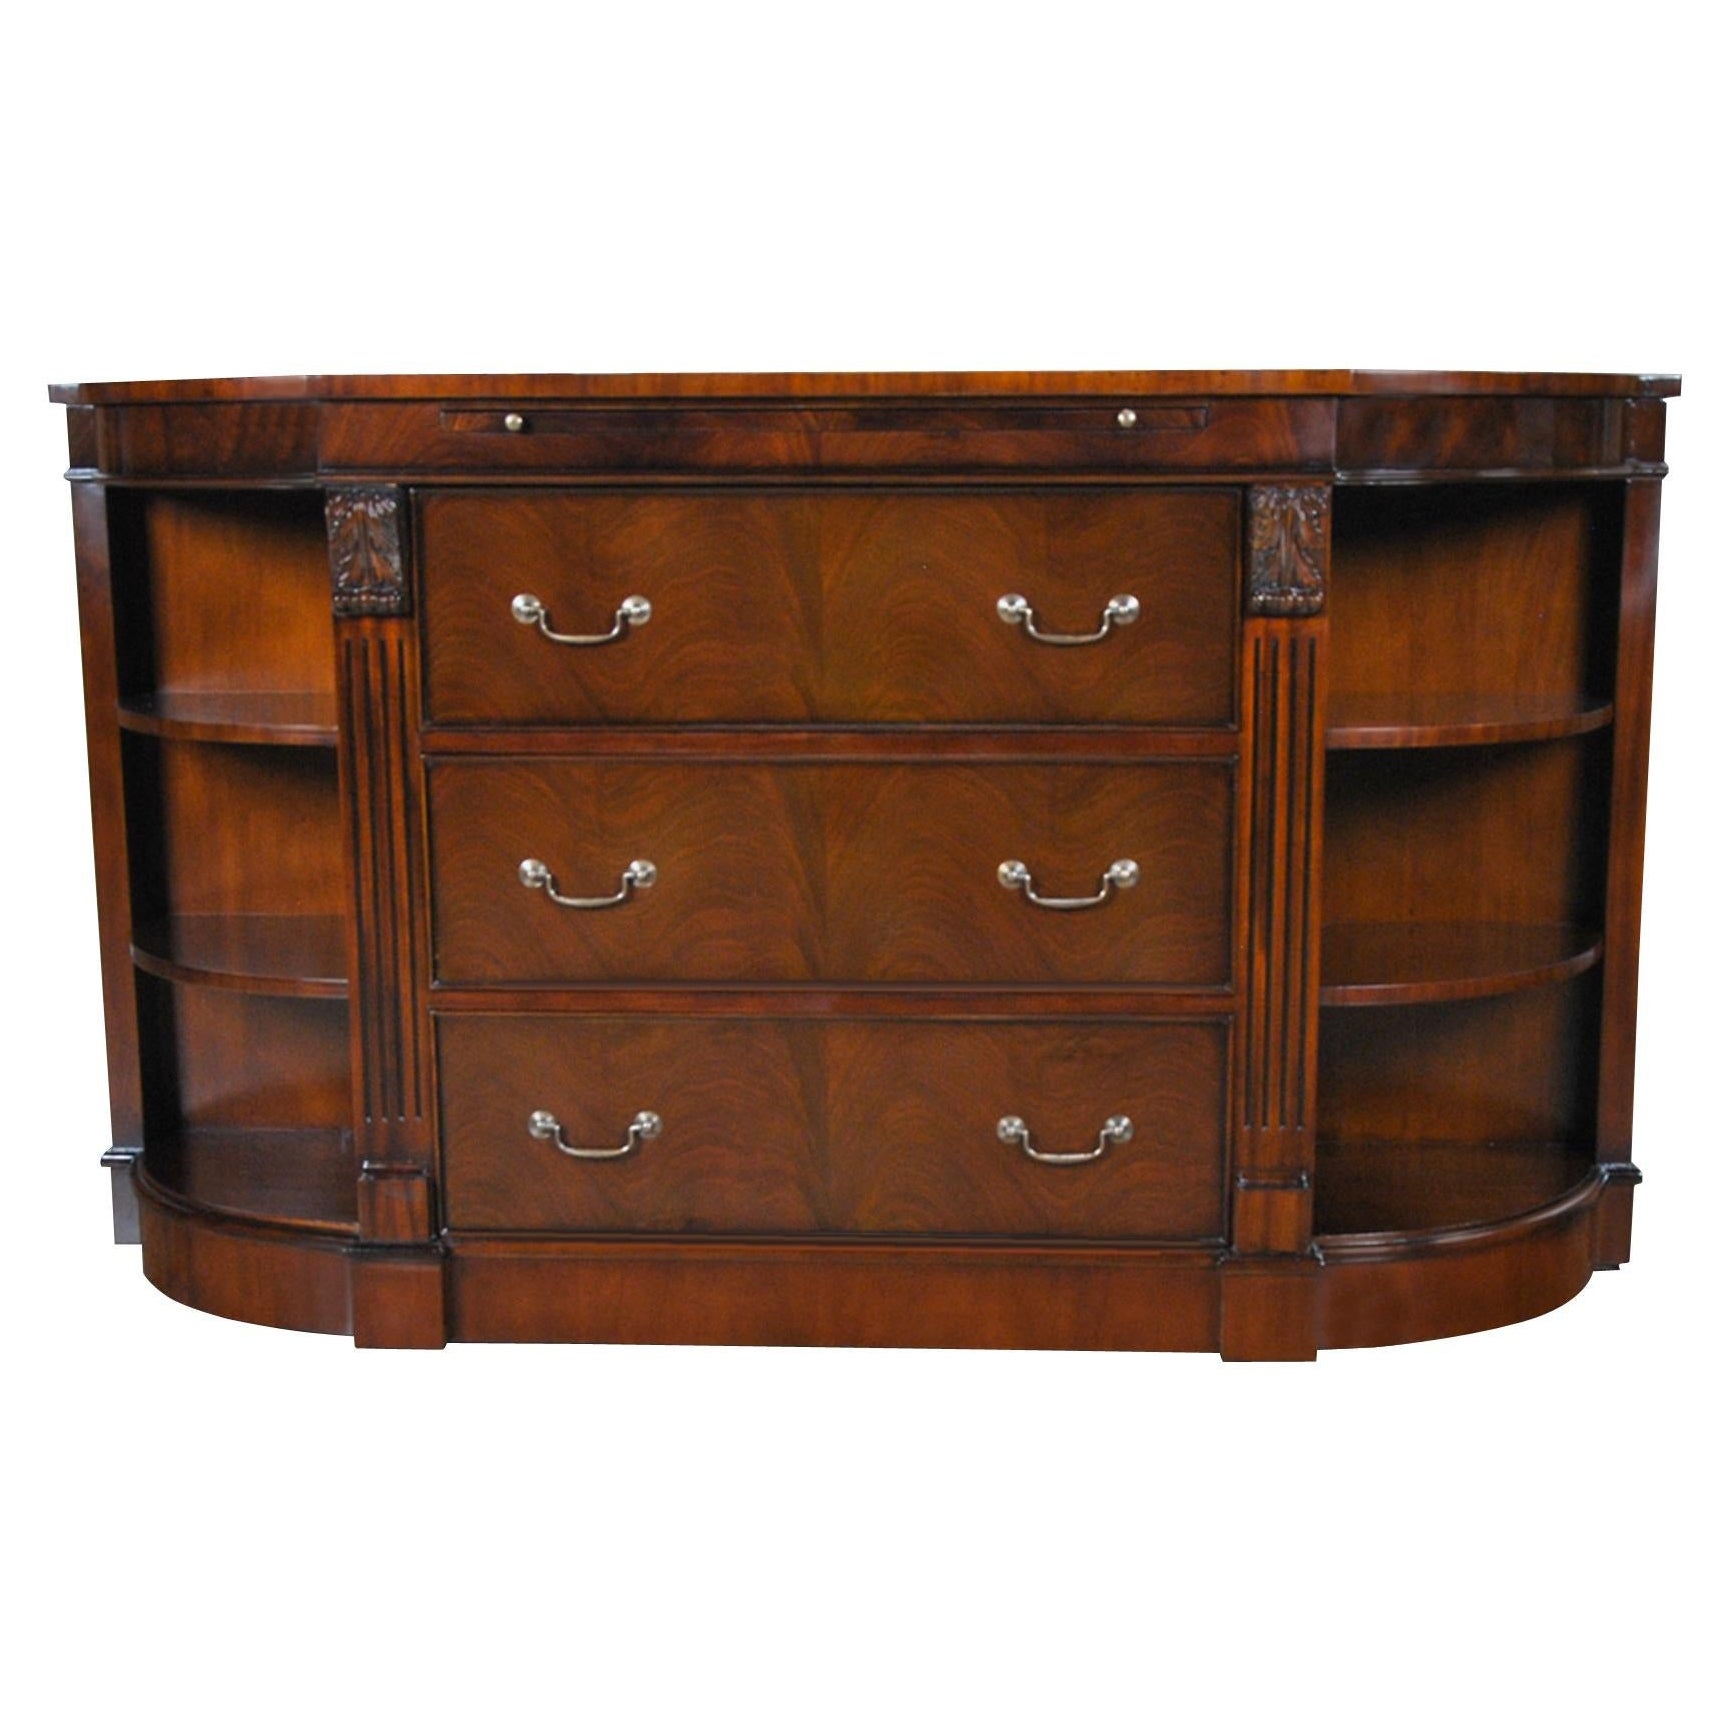 Mahogany Credenza with Pullout Slide For Sale